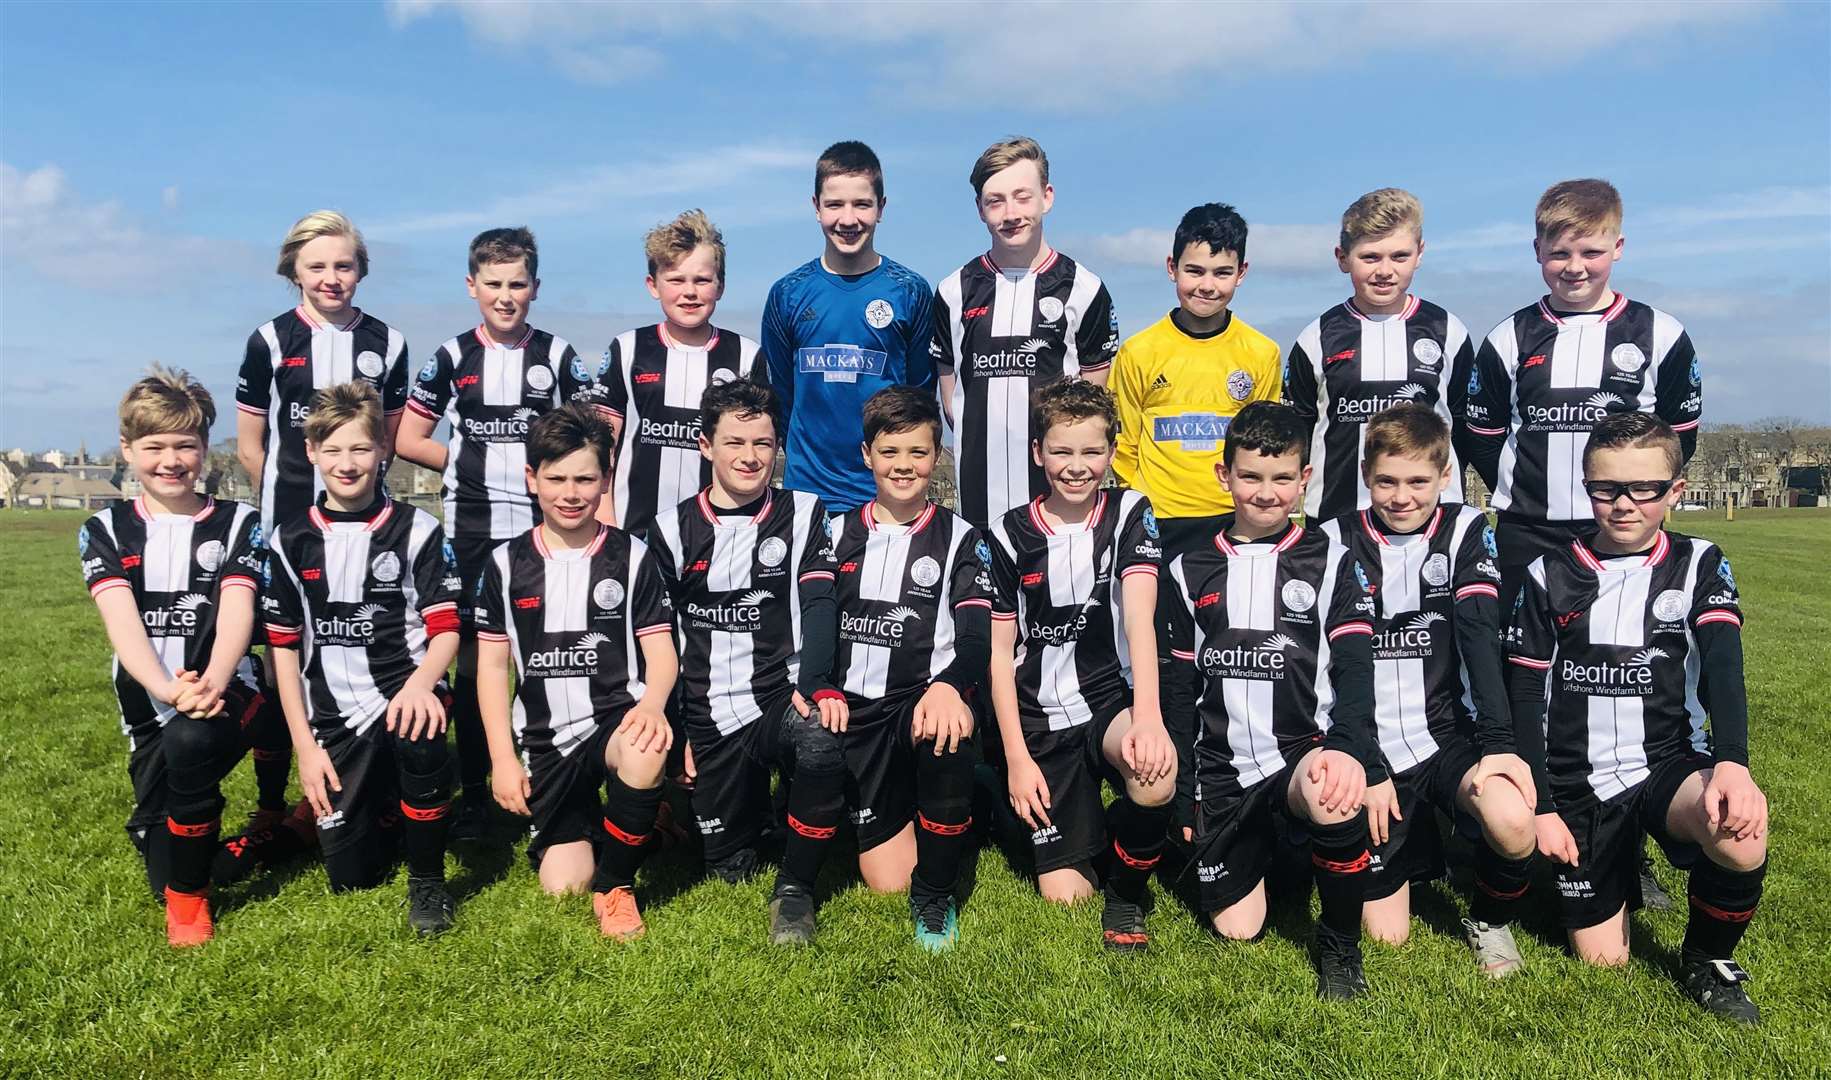 The Caithness United under-13s who defeated Forres at Wick’s Upper Bignold Park. Back row (from left): Carter Mackay, Matthew Aitkenhead, Keiran Macgregor, Grant Kennedy, Lucas Reid, Leo Shearer, Matthew Robertson and Aaron Mackay. Front: Sam Reid, Rory Taylor, Stevie Esson, Euan Kennedy, Owen Bain, Elliot Cormack, Sam Shearer, Josh Sutherland and Matthew Mackay.